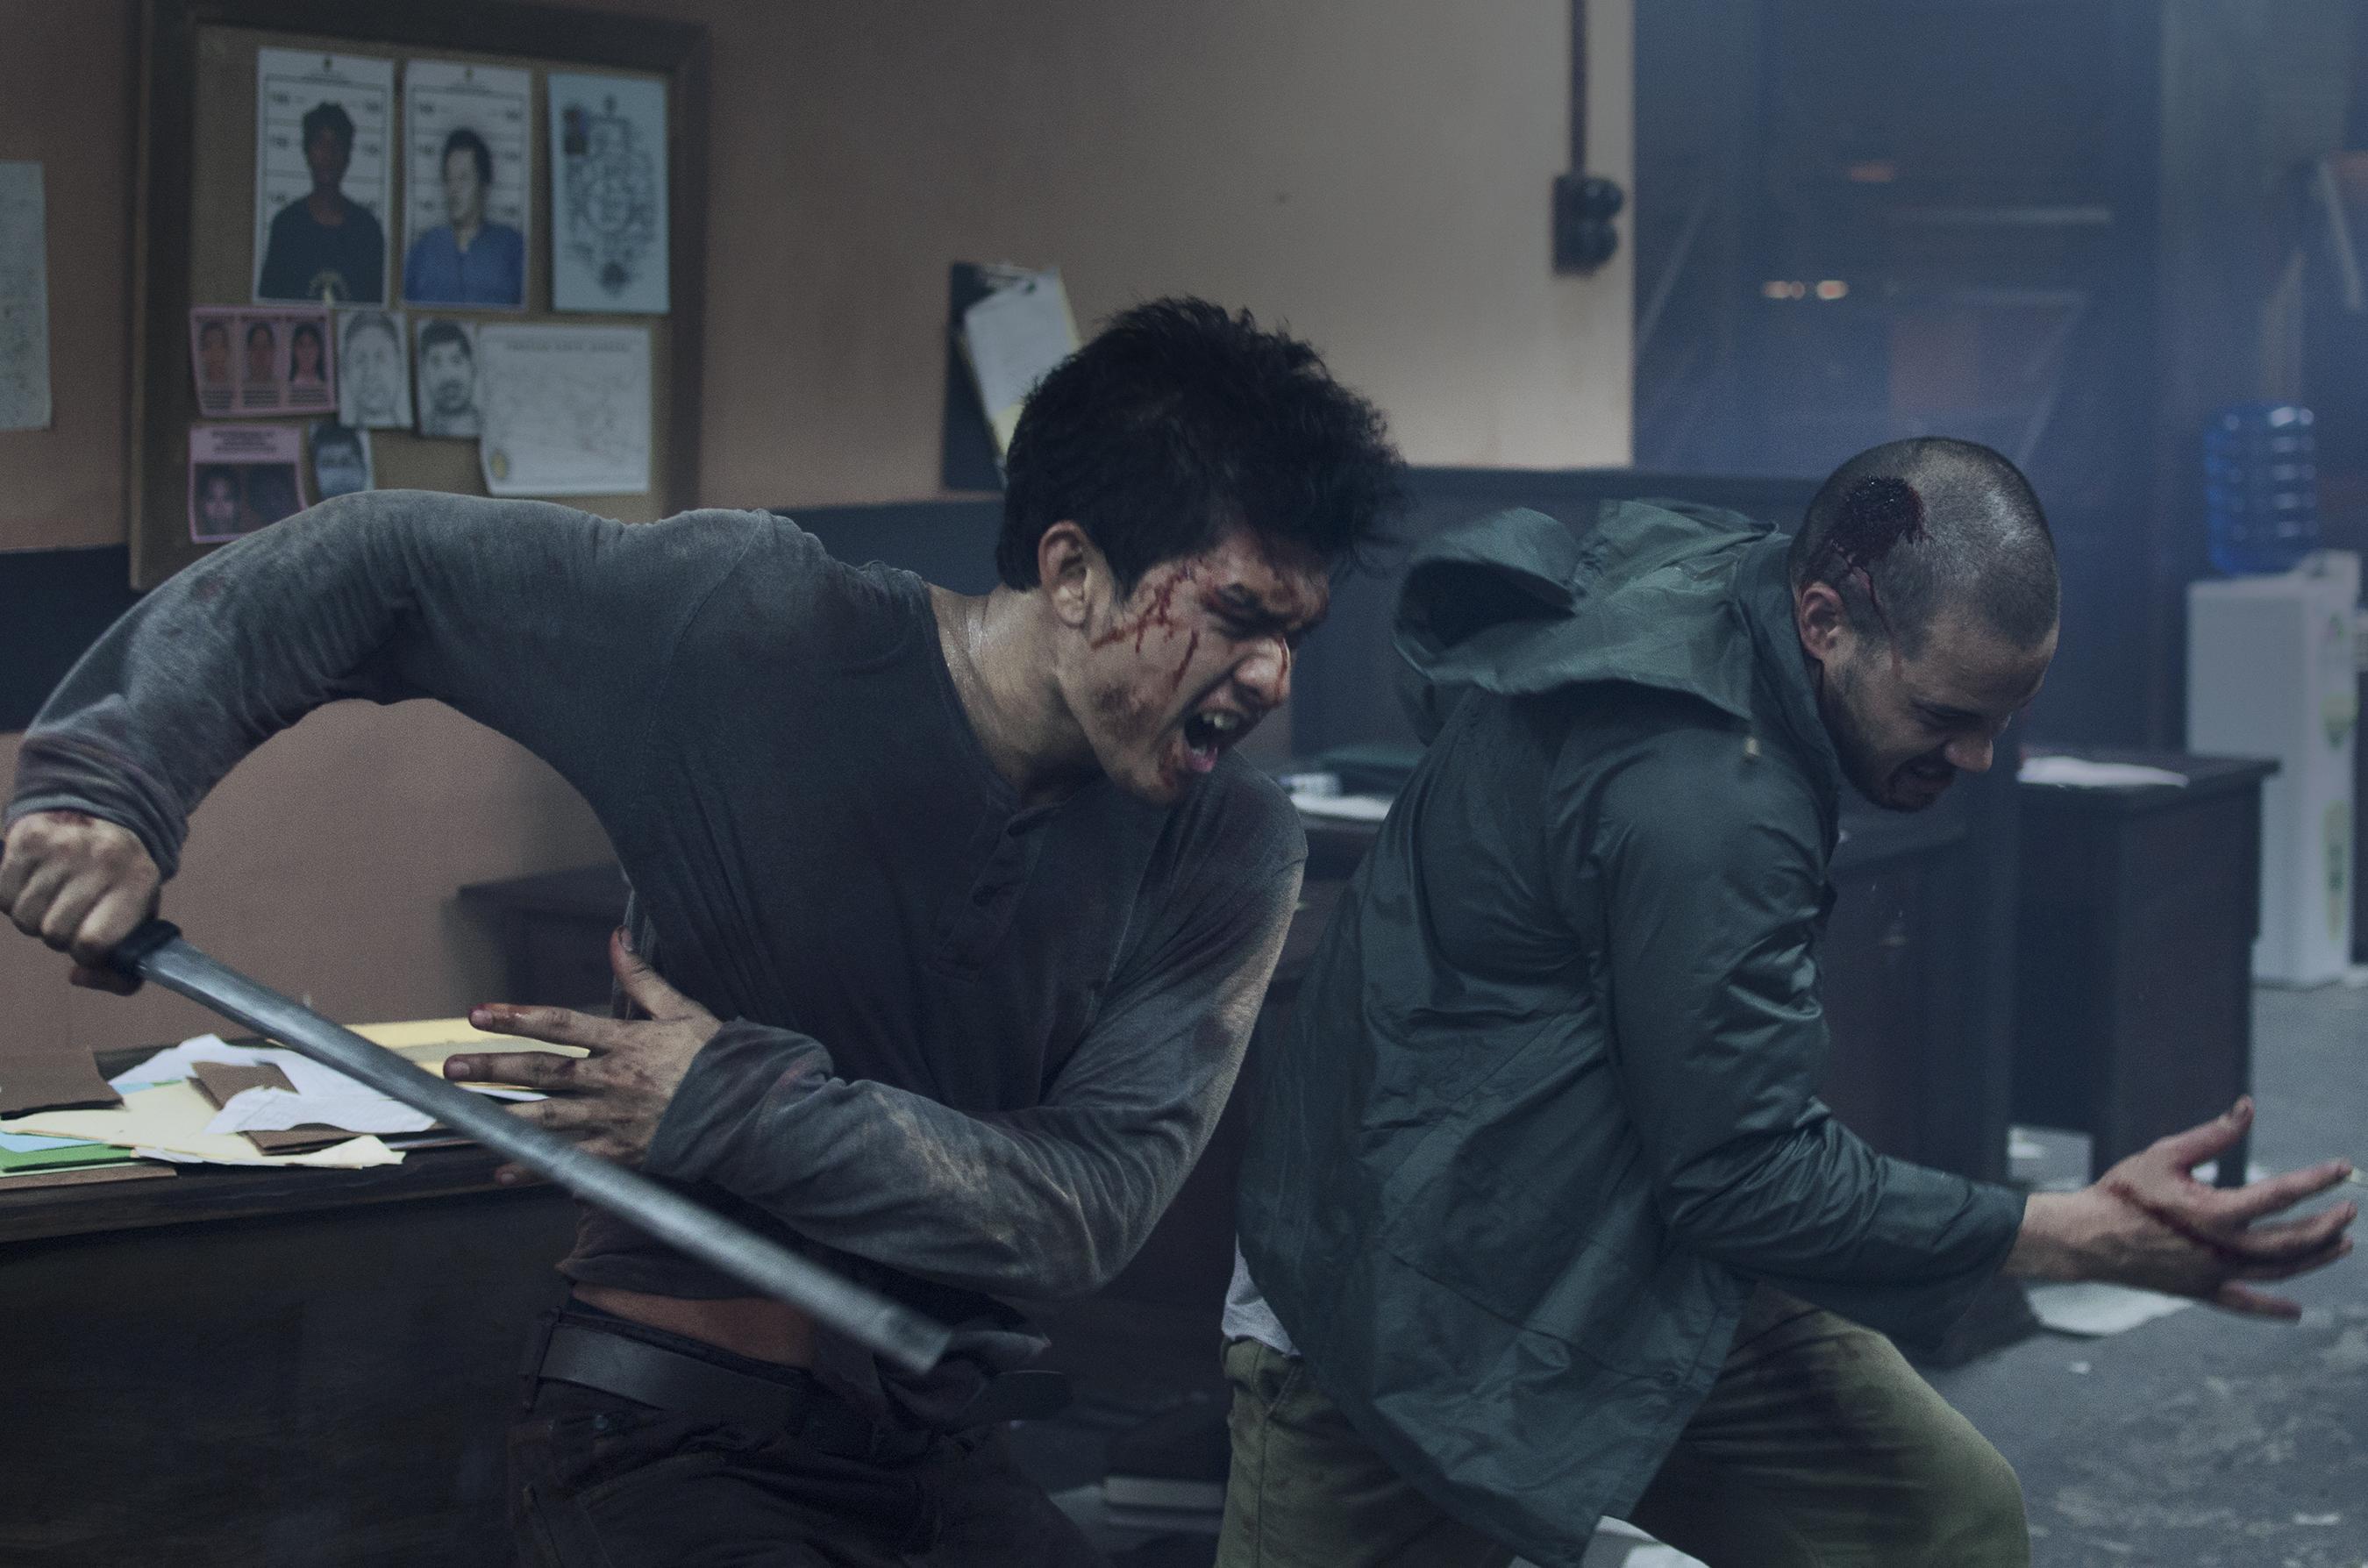 Headshot Review: Iko Uwais Action Film Misses the Mark